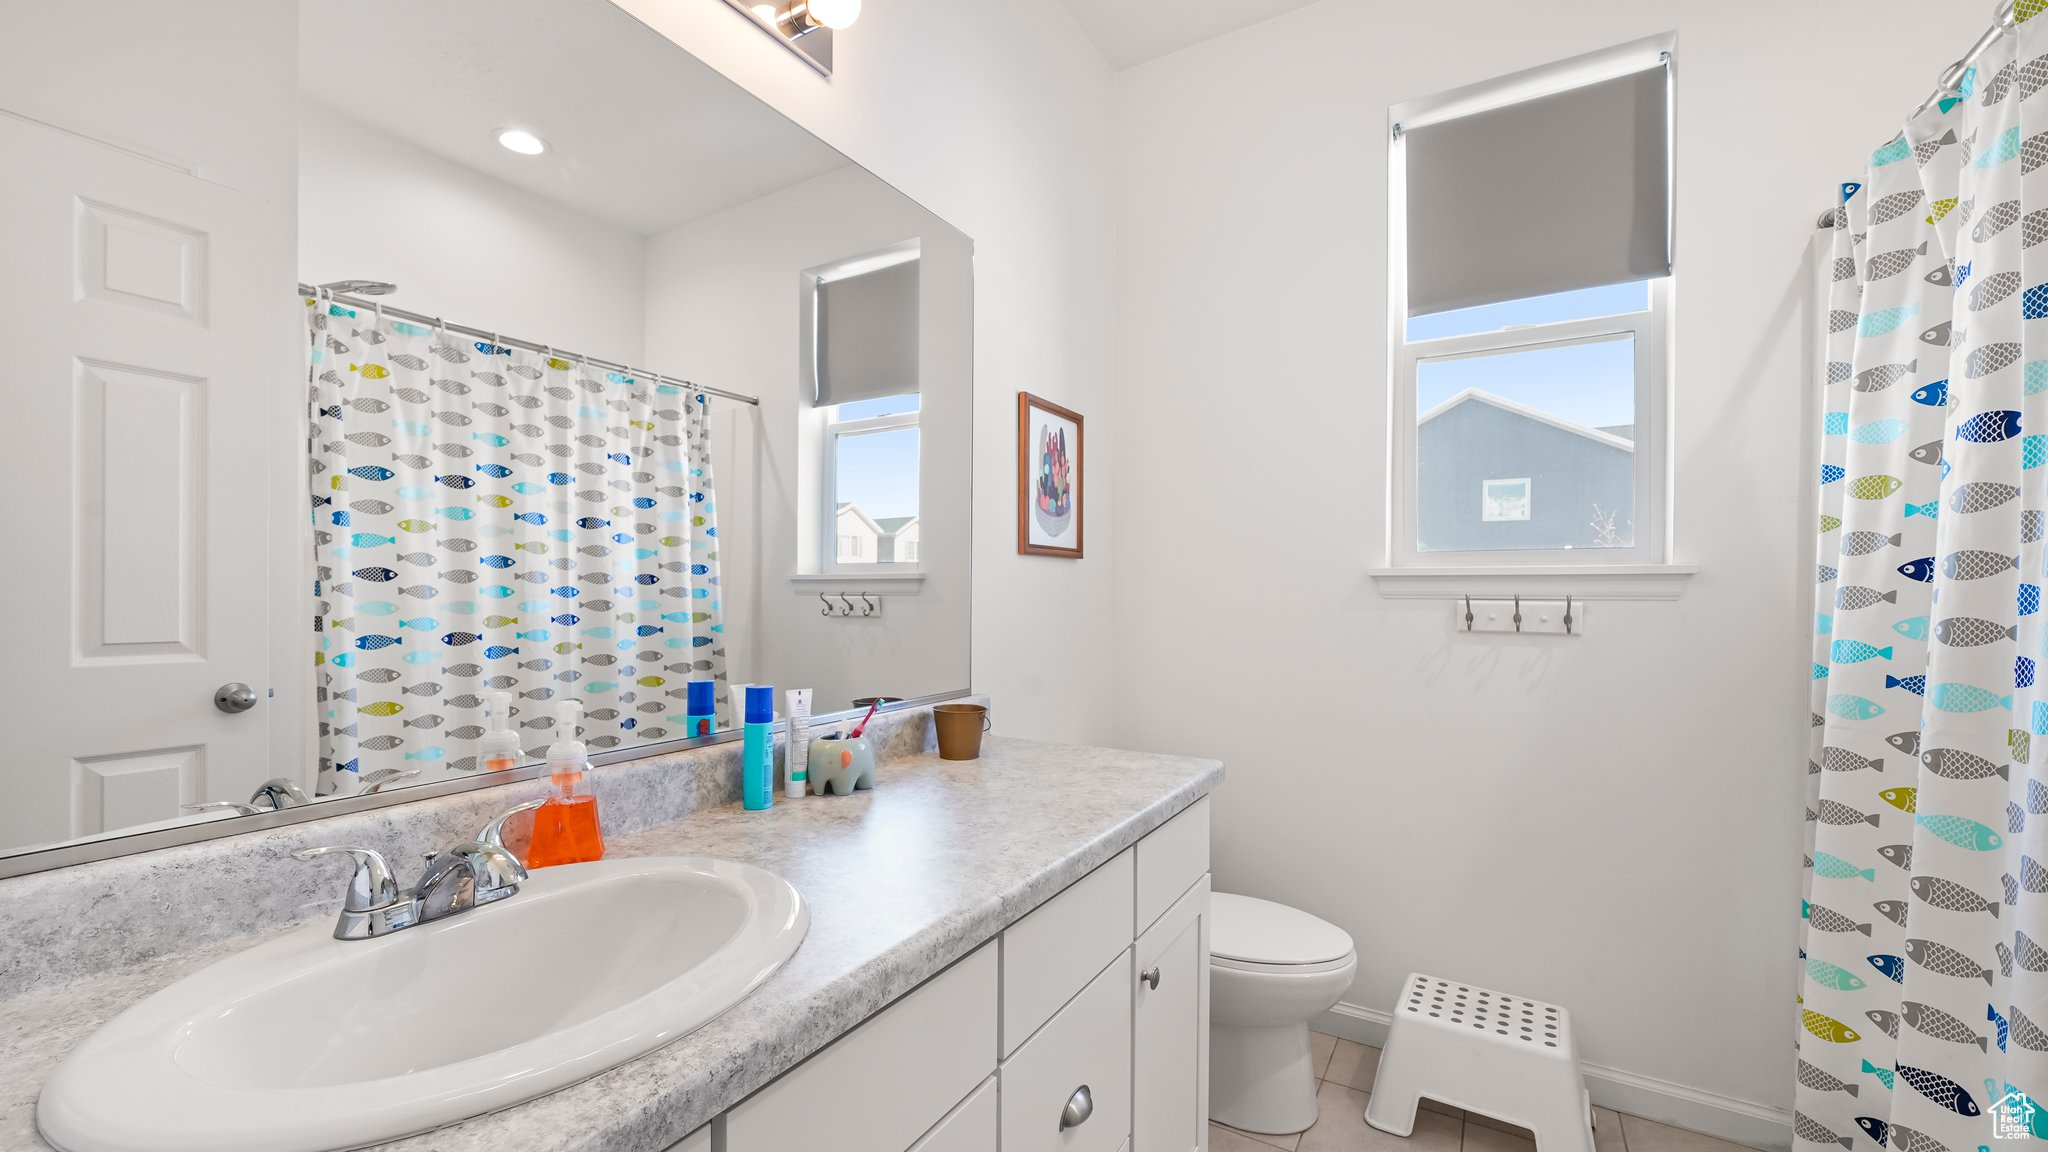 Bathroom with vanity with extensive cabinet space, tile floors, and toilet